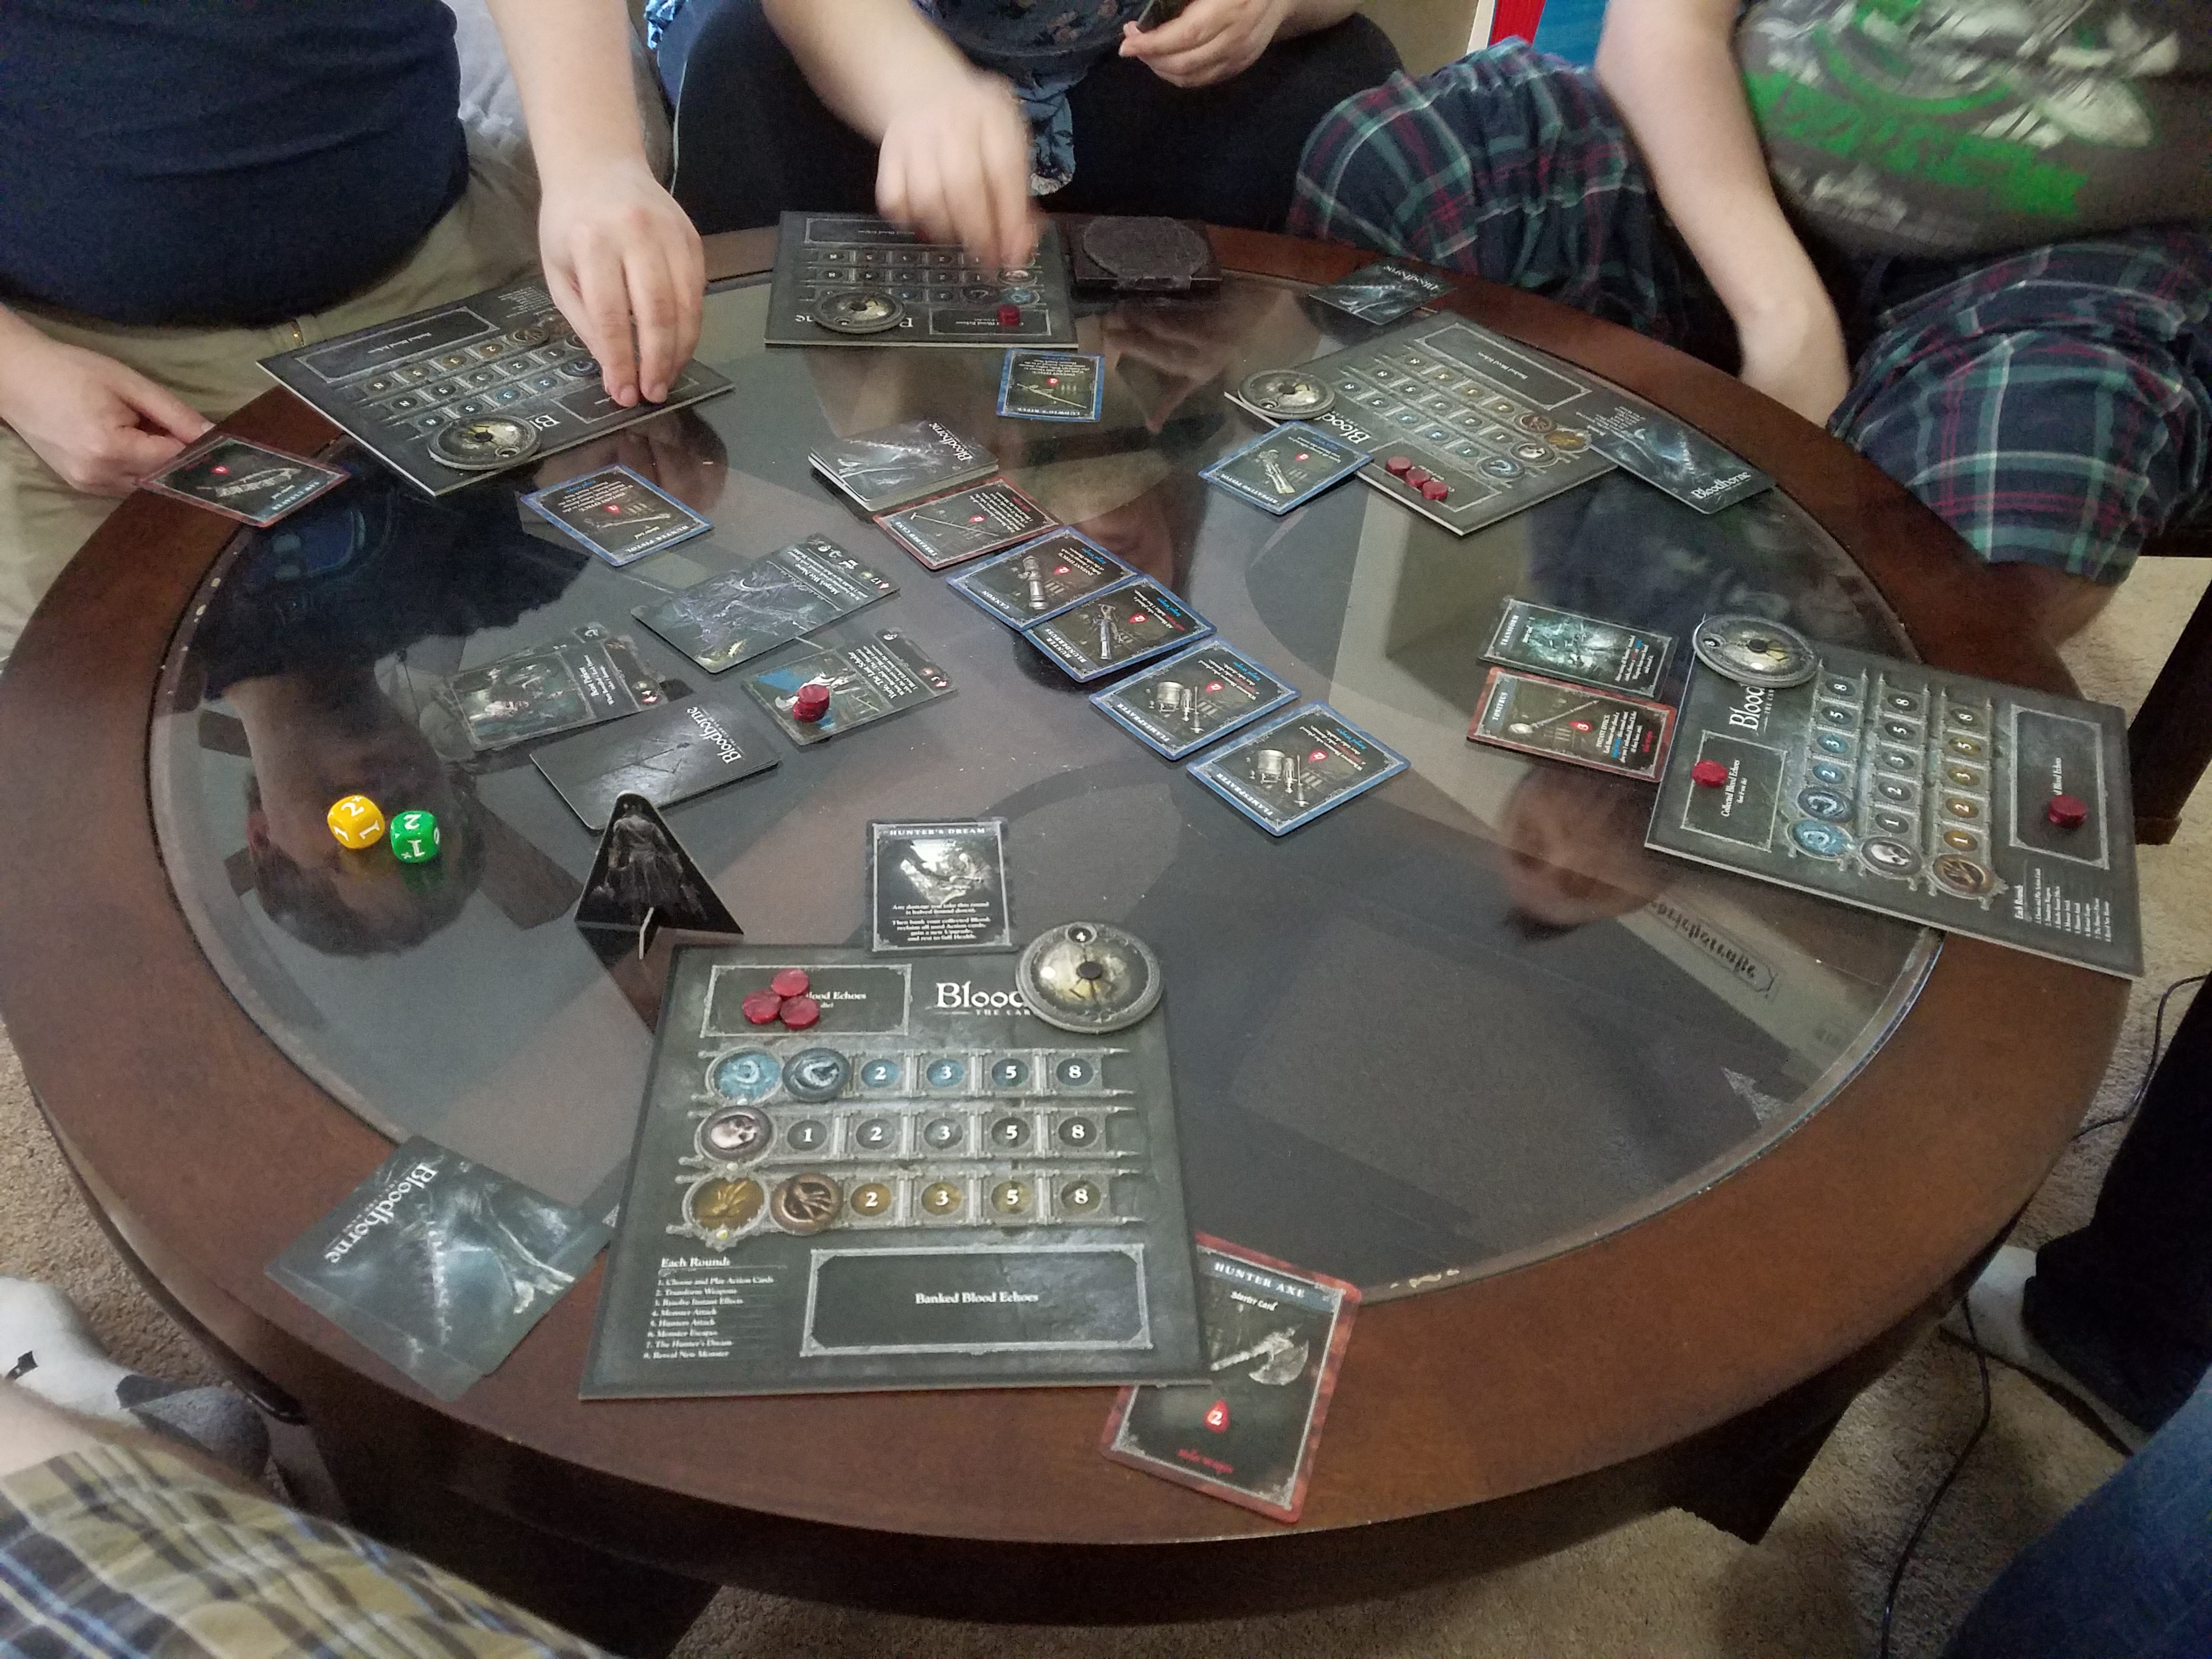 Bloodborne: The Board Game Review